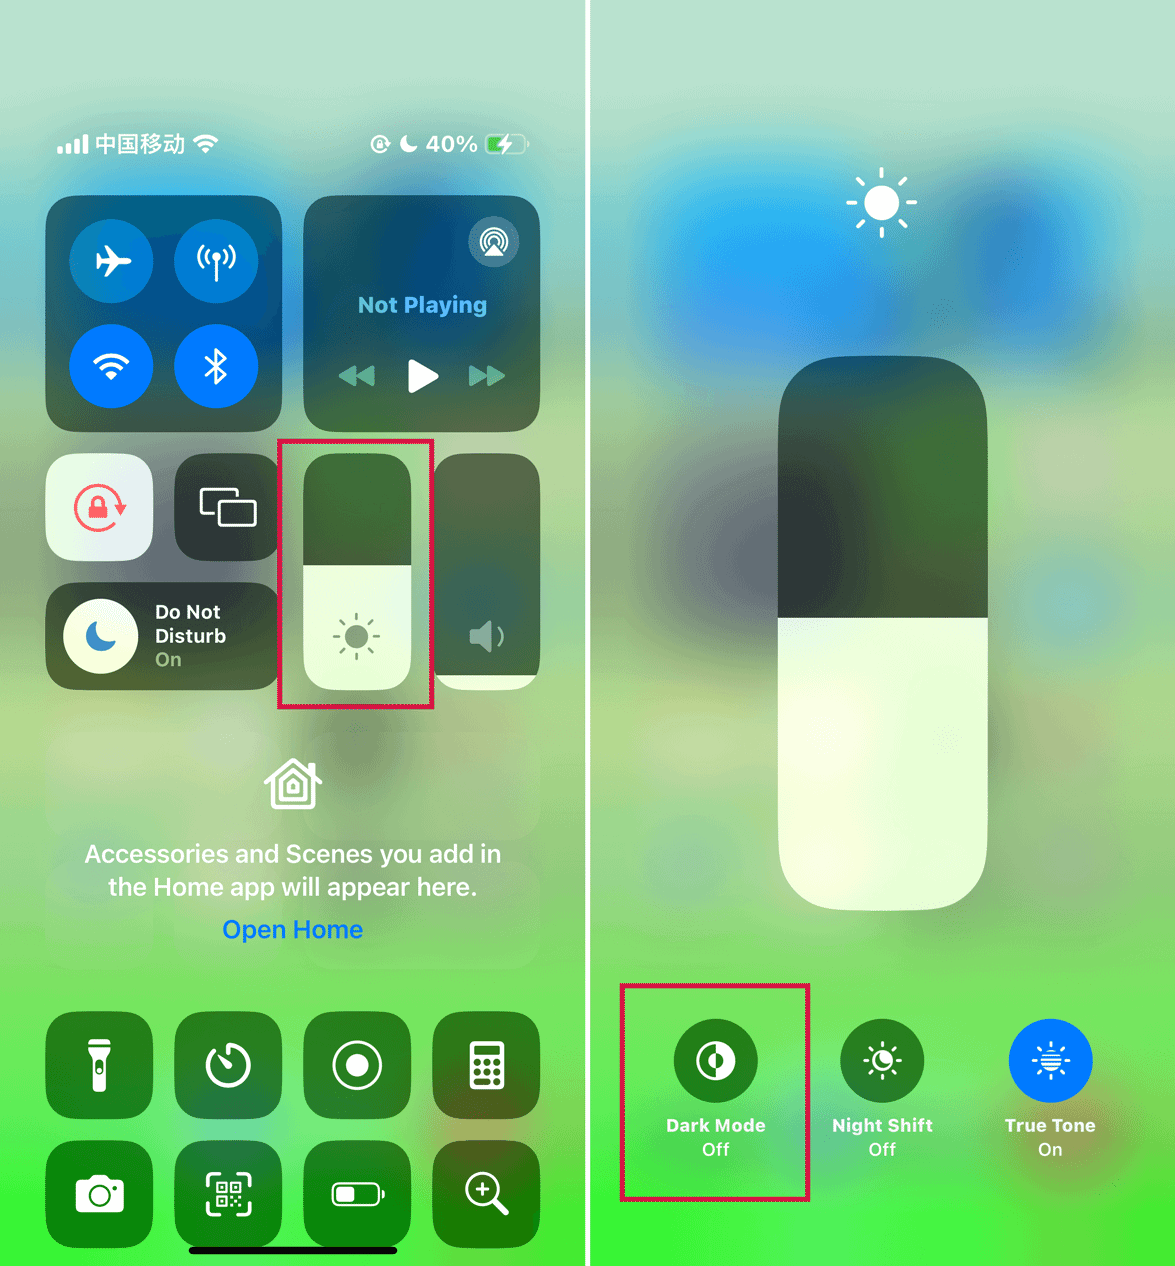 Steps to Turn Dark Mode On or Off via iphone control center